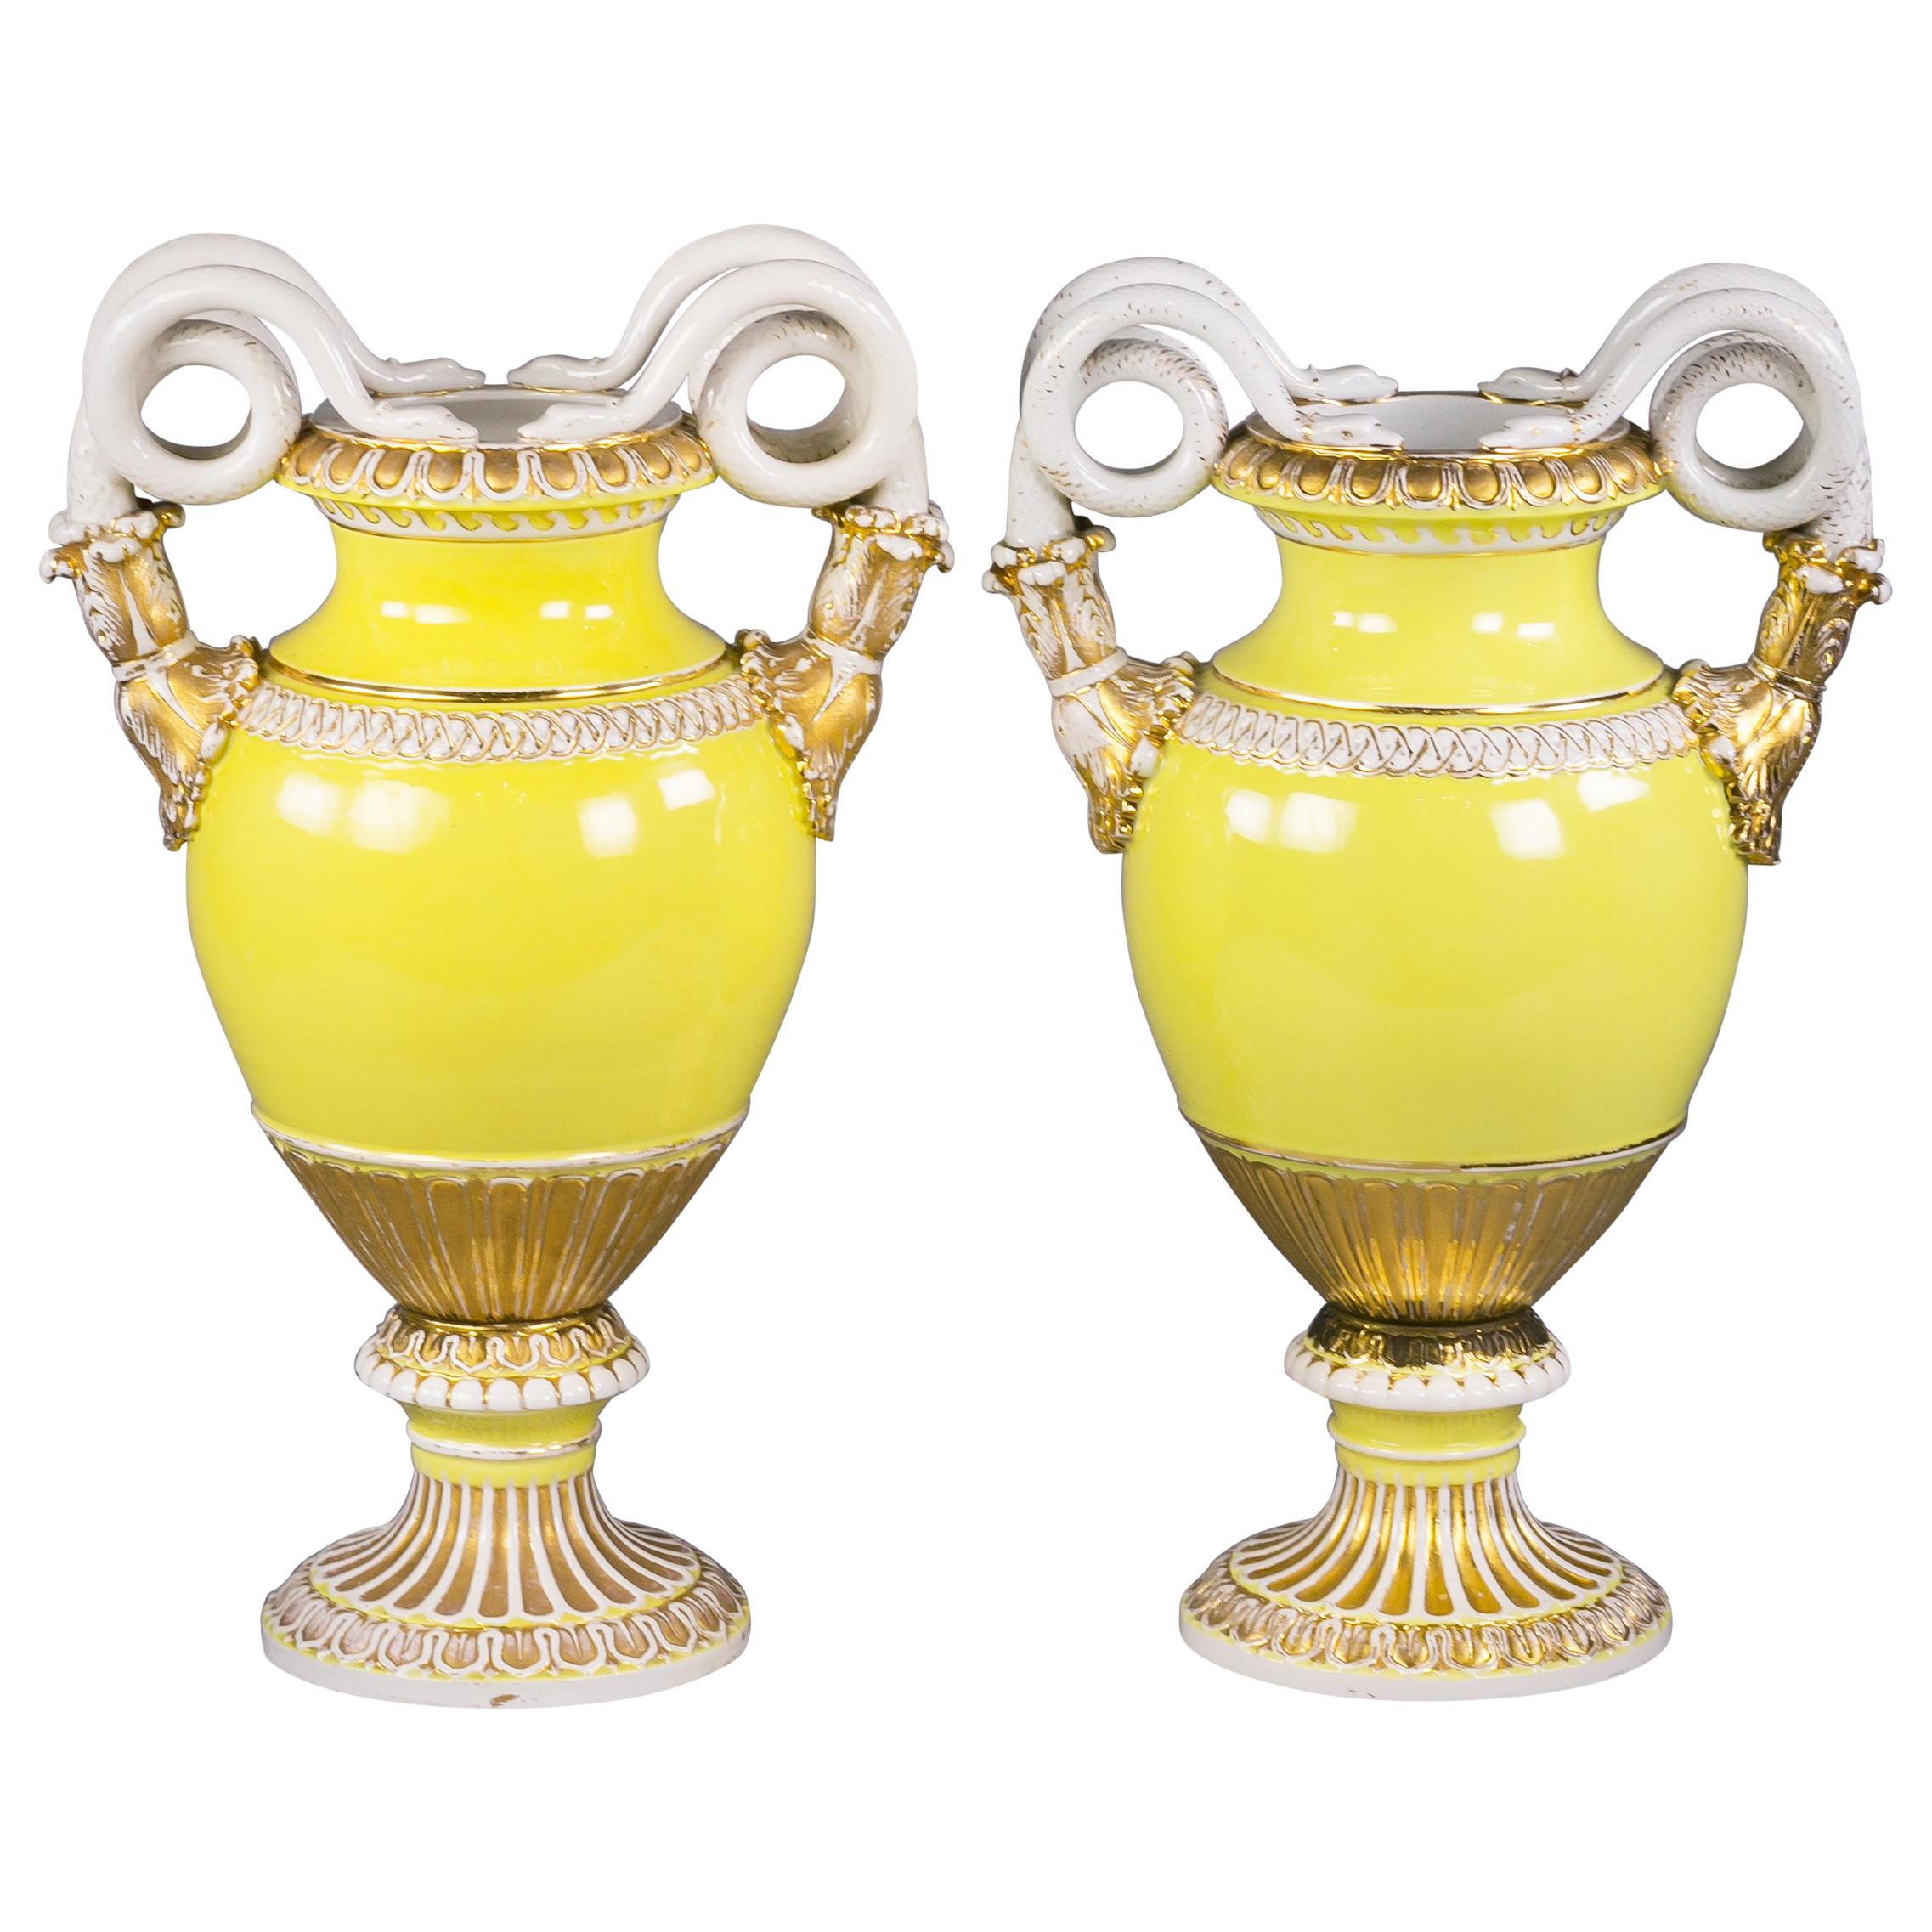 Two Meissen Porcelain Two Handled Vases, circa 1890